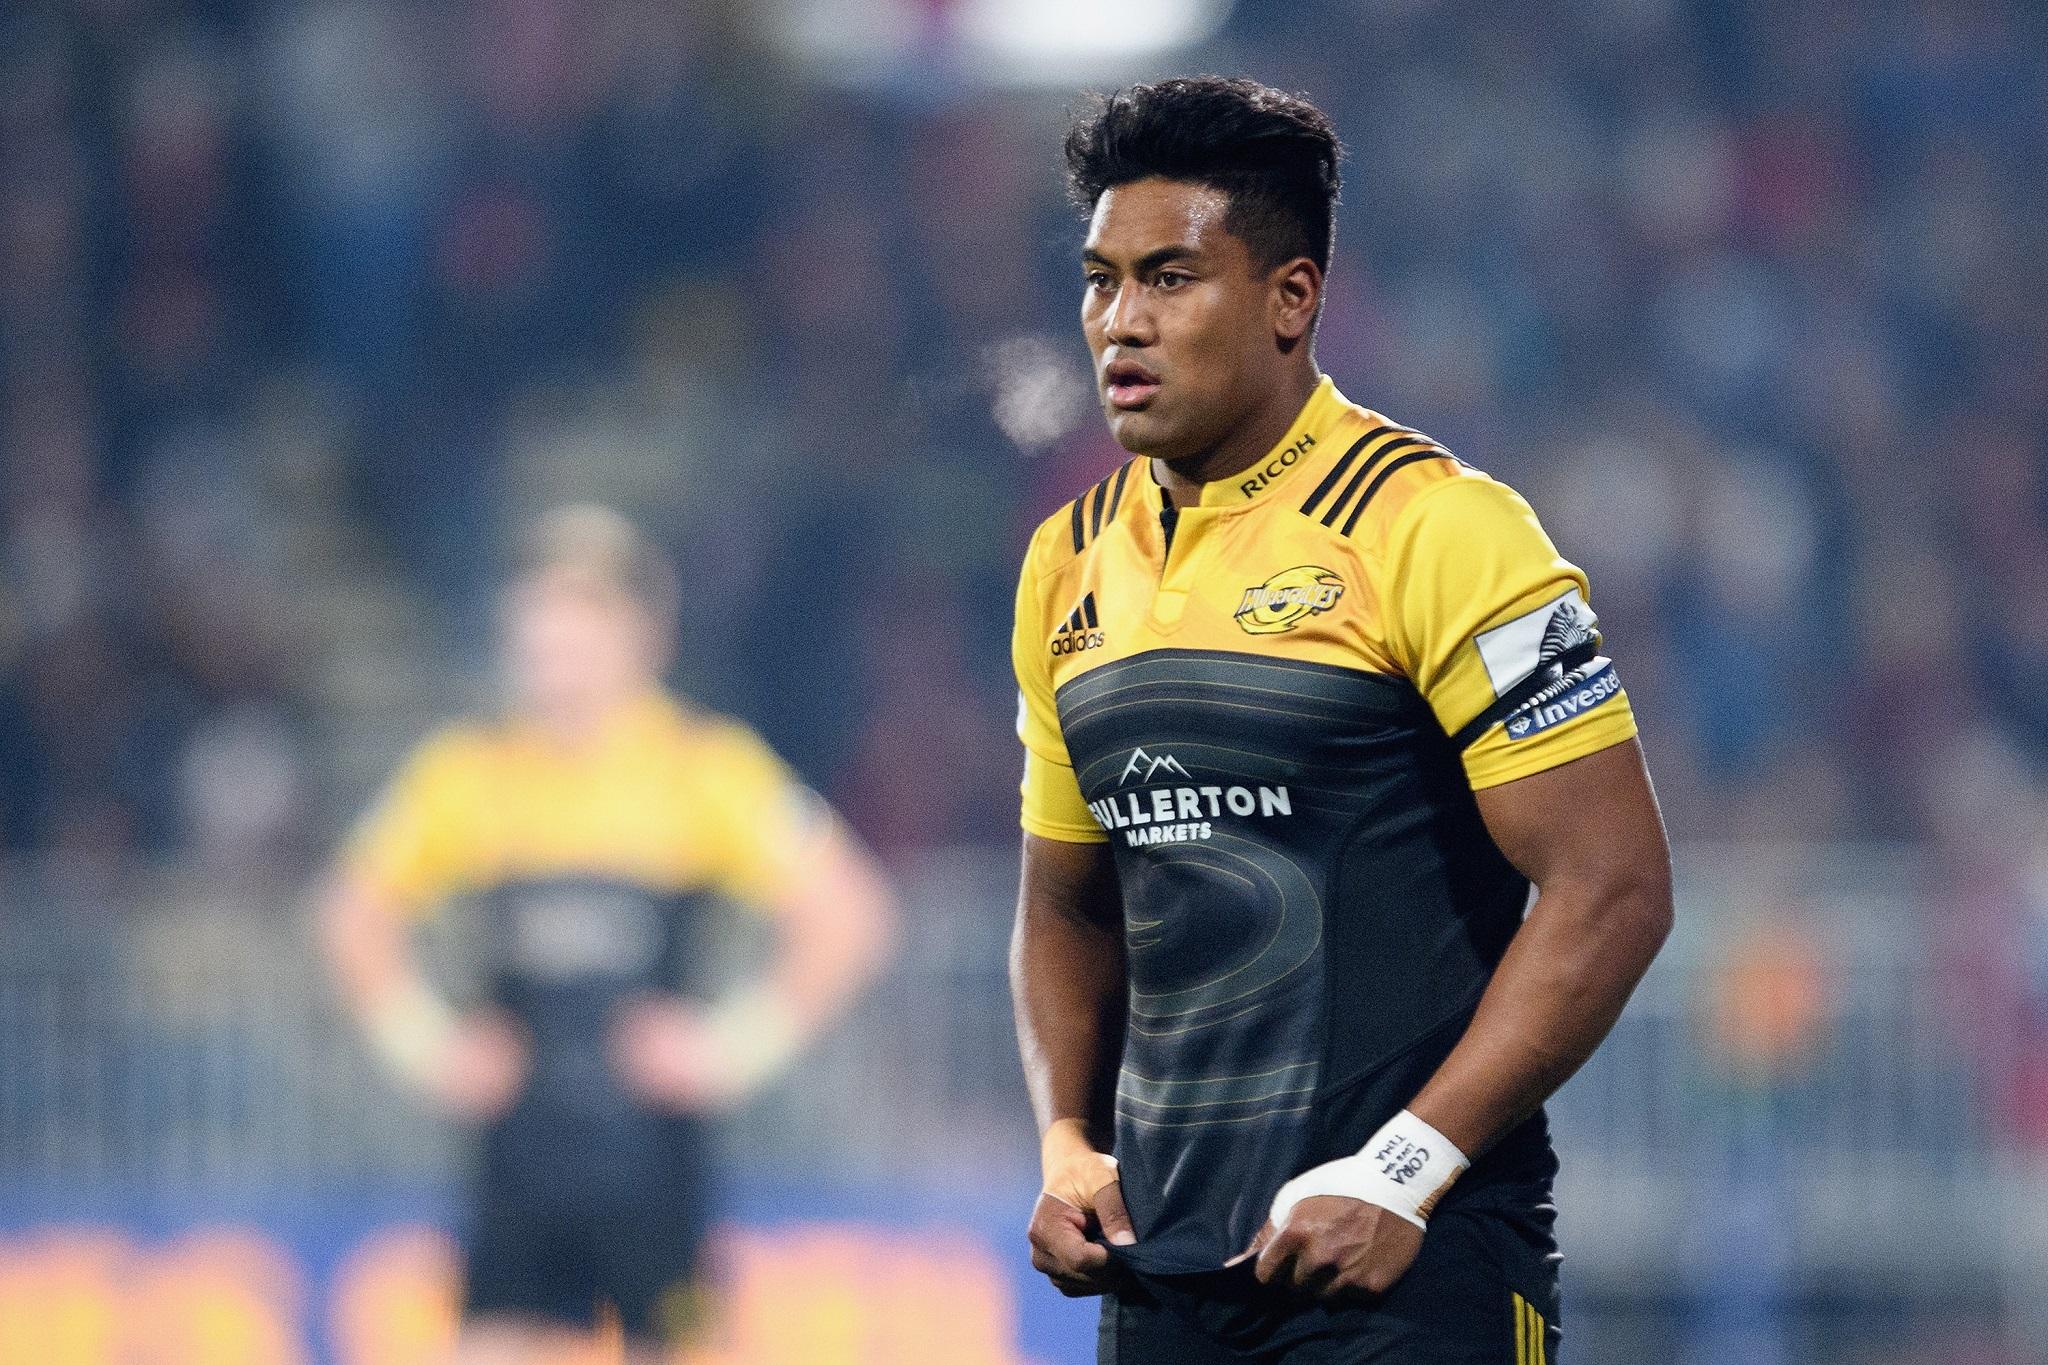 Julian Savea will be one of three current All Blacks to face the British and Irish Lions on Tuesday